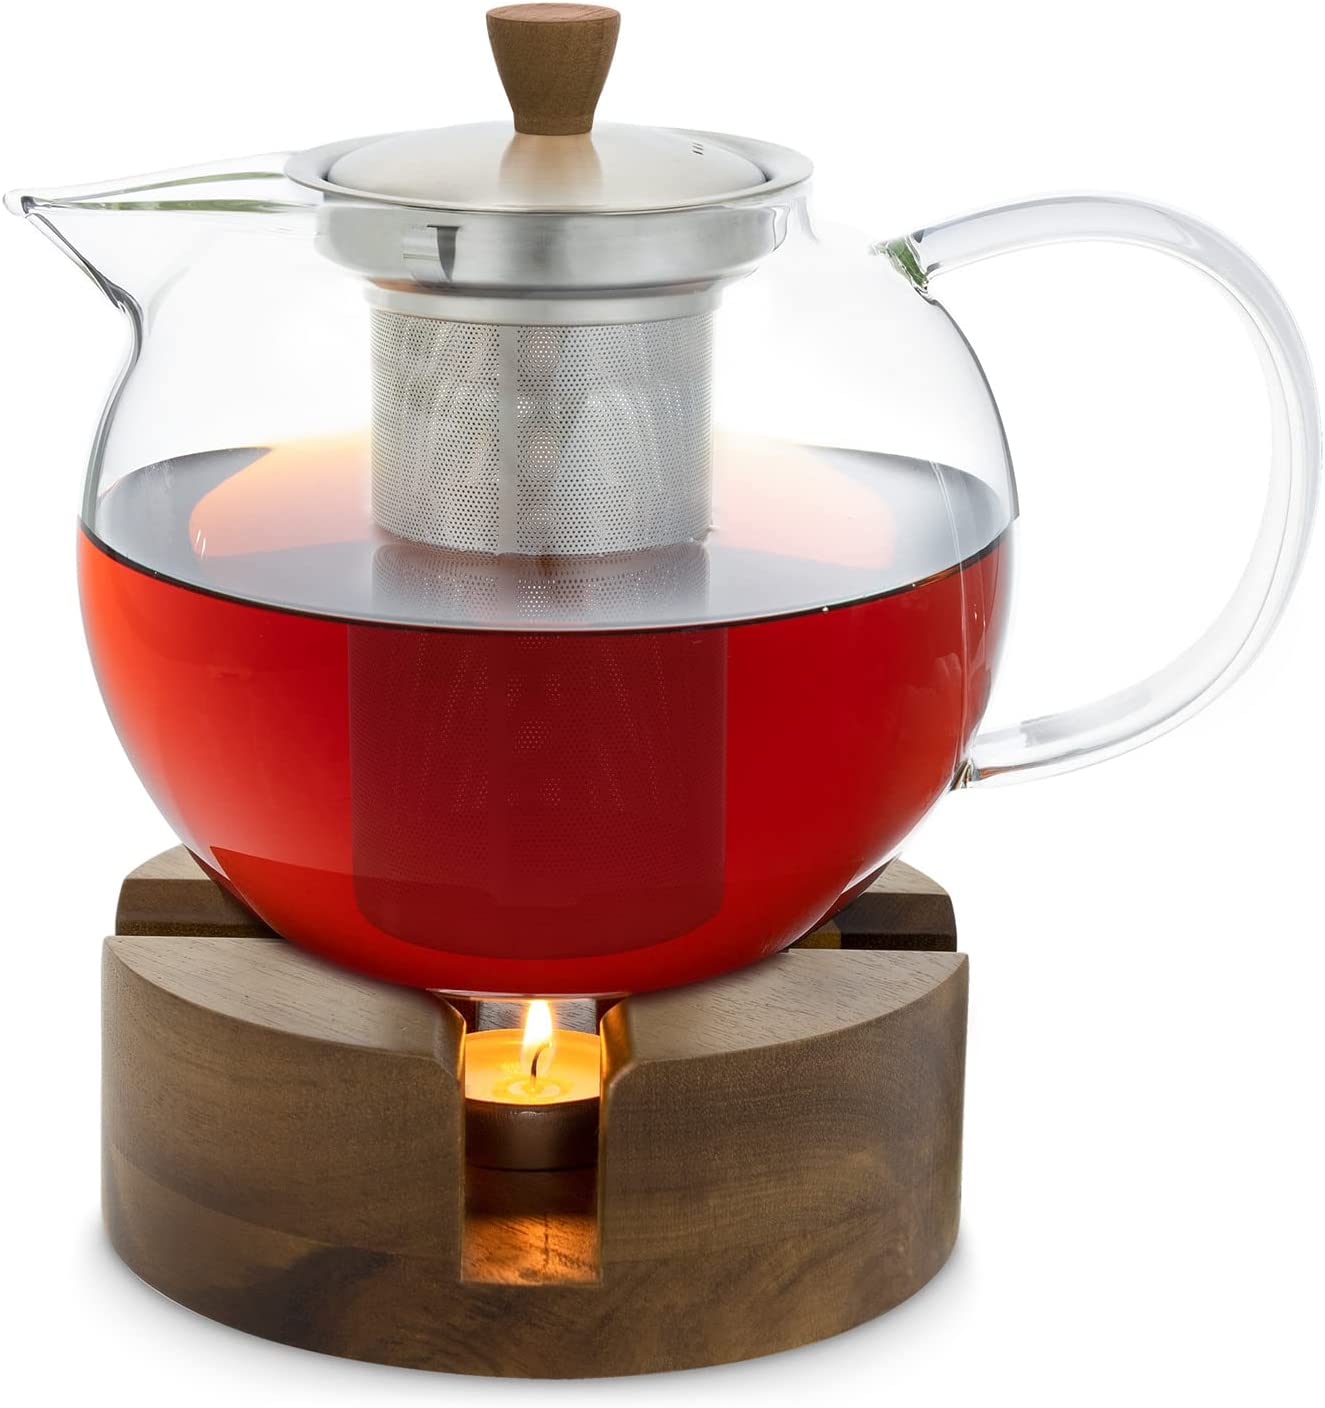 GLASWERK Teapot and Warmer Set (1.3 L) – Teapot with Warmer Made of Elegant Acacia Wood – Glass Teapot with Strainer Insert Made of Stainless Steel